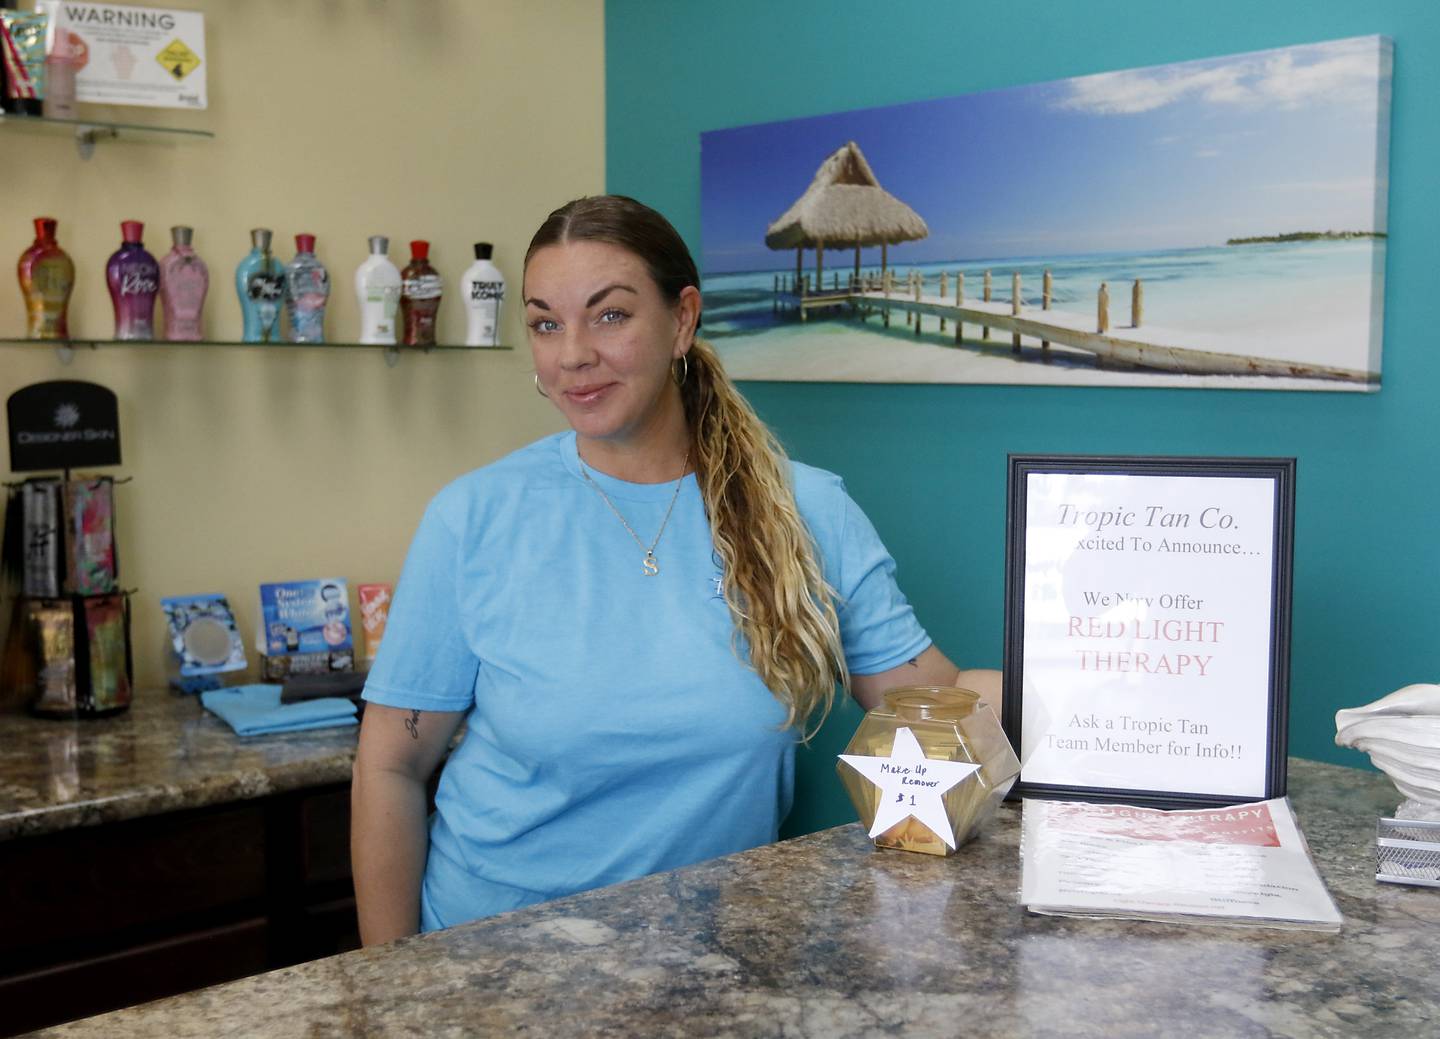 Stephanie Szablewsk, owner of Tropic Tan Company in Crystal Lake, inside her tanning salon Friday, Feb. 25, 2022. She plans to open the tanning salon 24 hours a day beginning in early March.